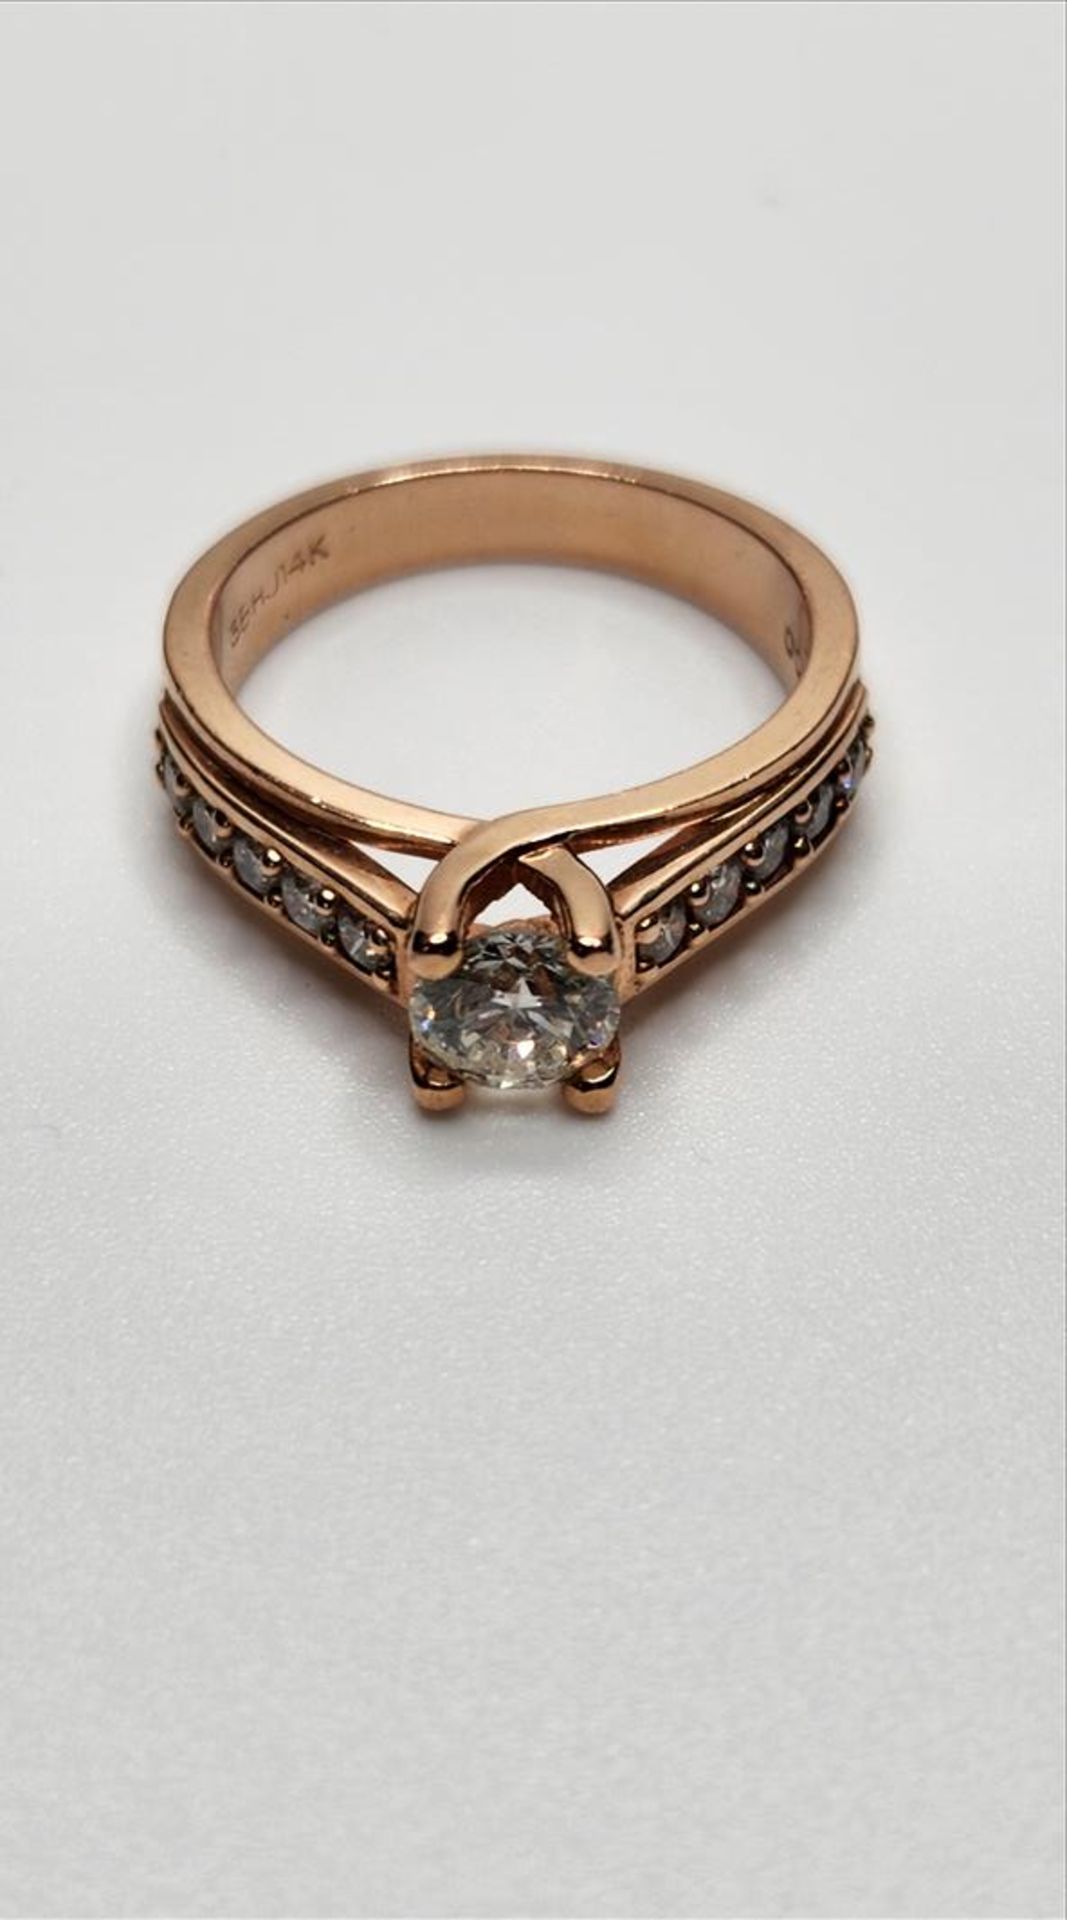 One lady’s stamped and tested 14kt pink gold diamond engagement ring. Contained at the centre is one